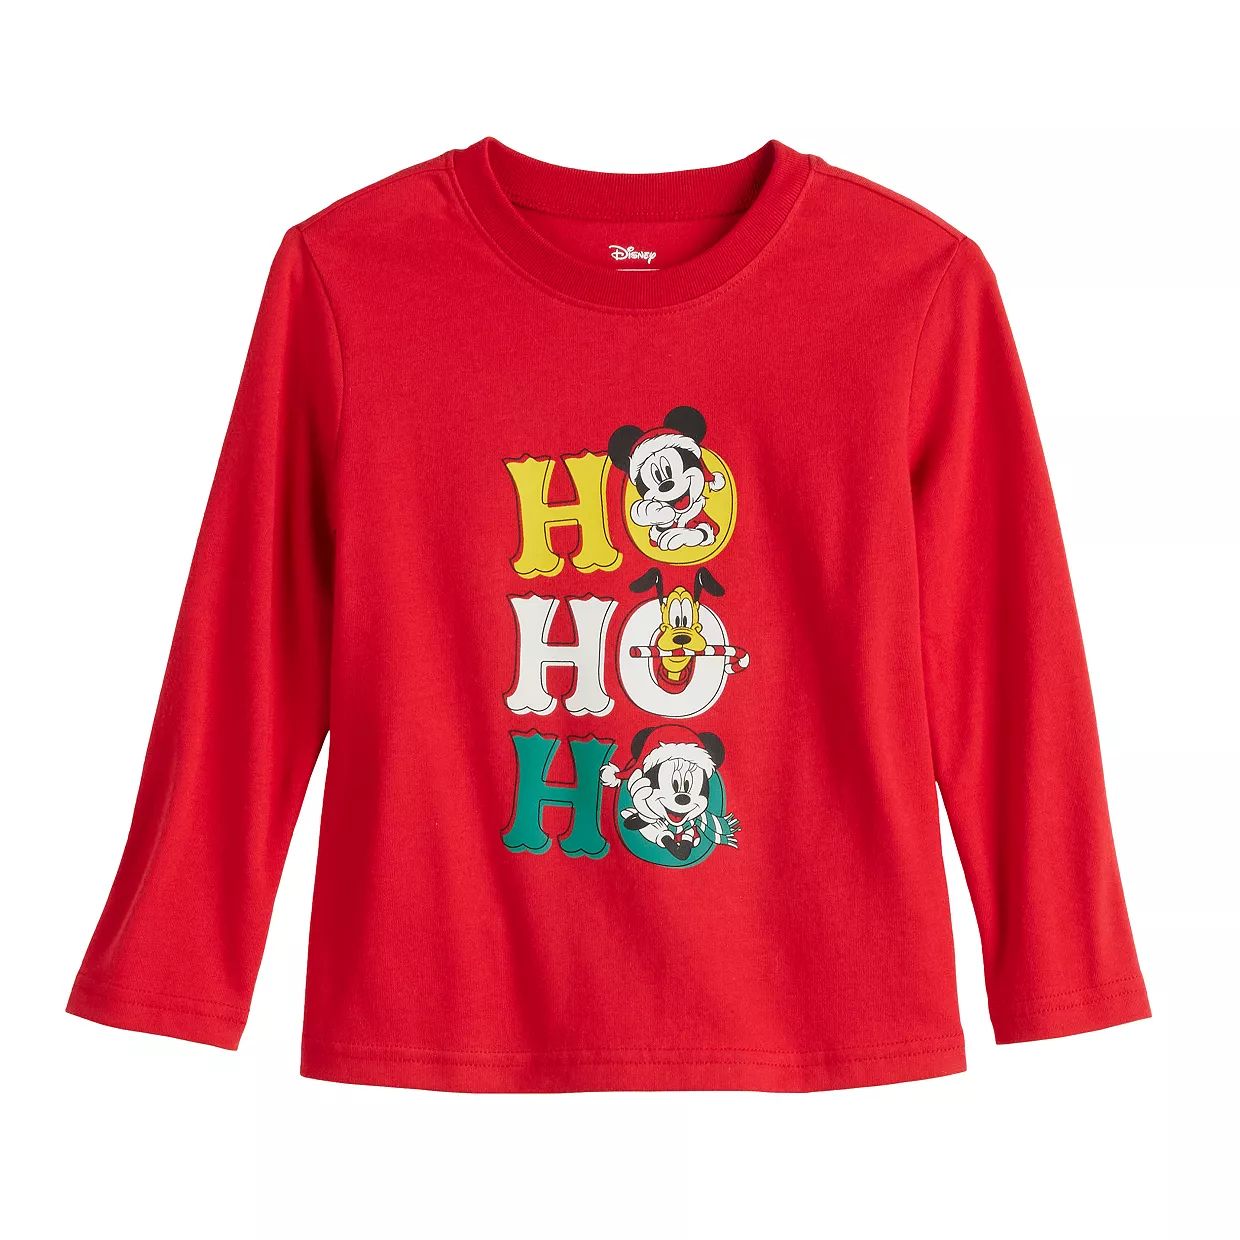 Disney's Mickey Mouse Baby & Toddler Boy Christmas Themed Long Sleeve Raglan Graphic Tee by Jumpi... | Kohl's